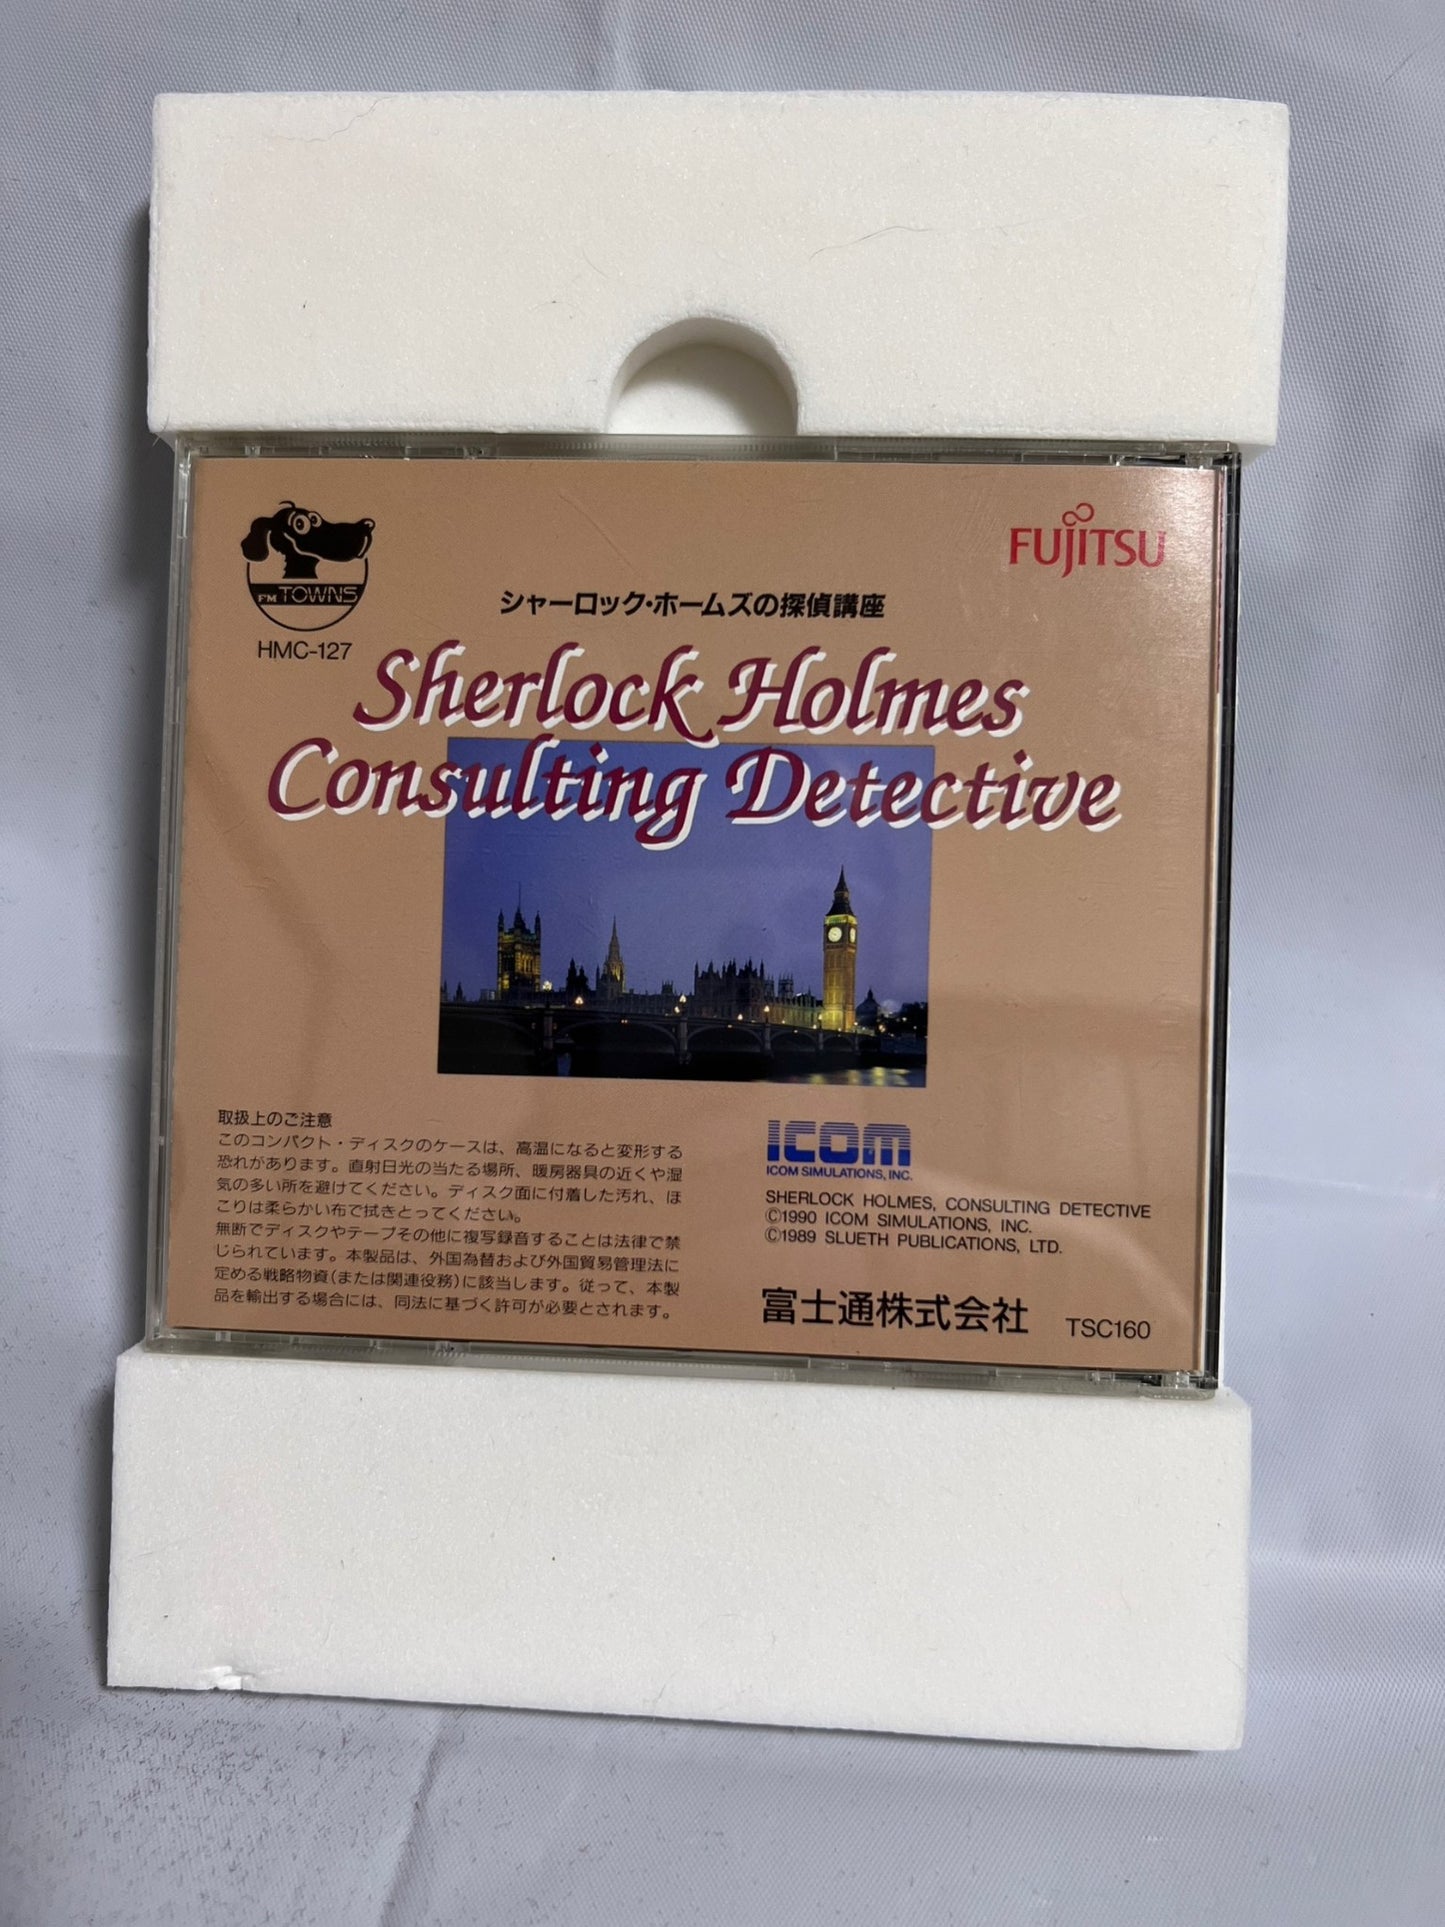 Sherlock Holmes Consulting Detective FM TOWNS Marty Game w/Manual, Box set-f1006